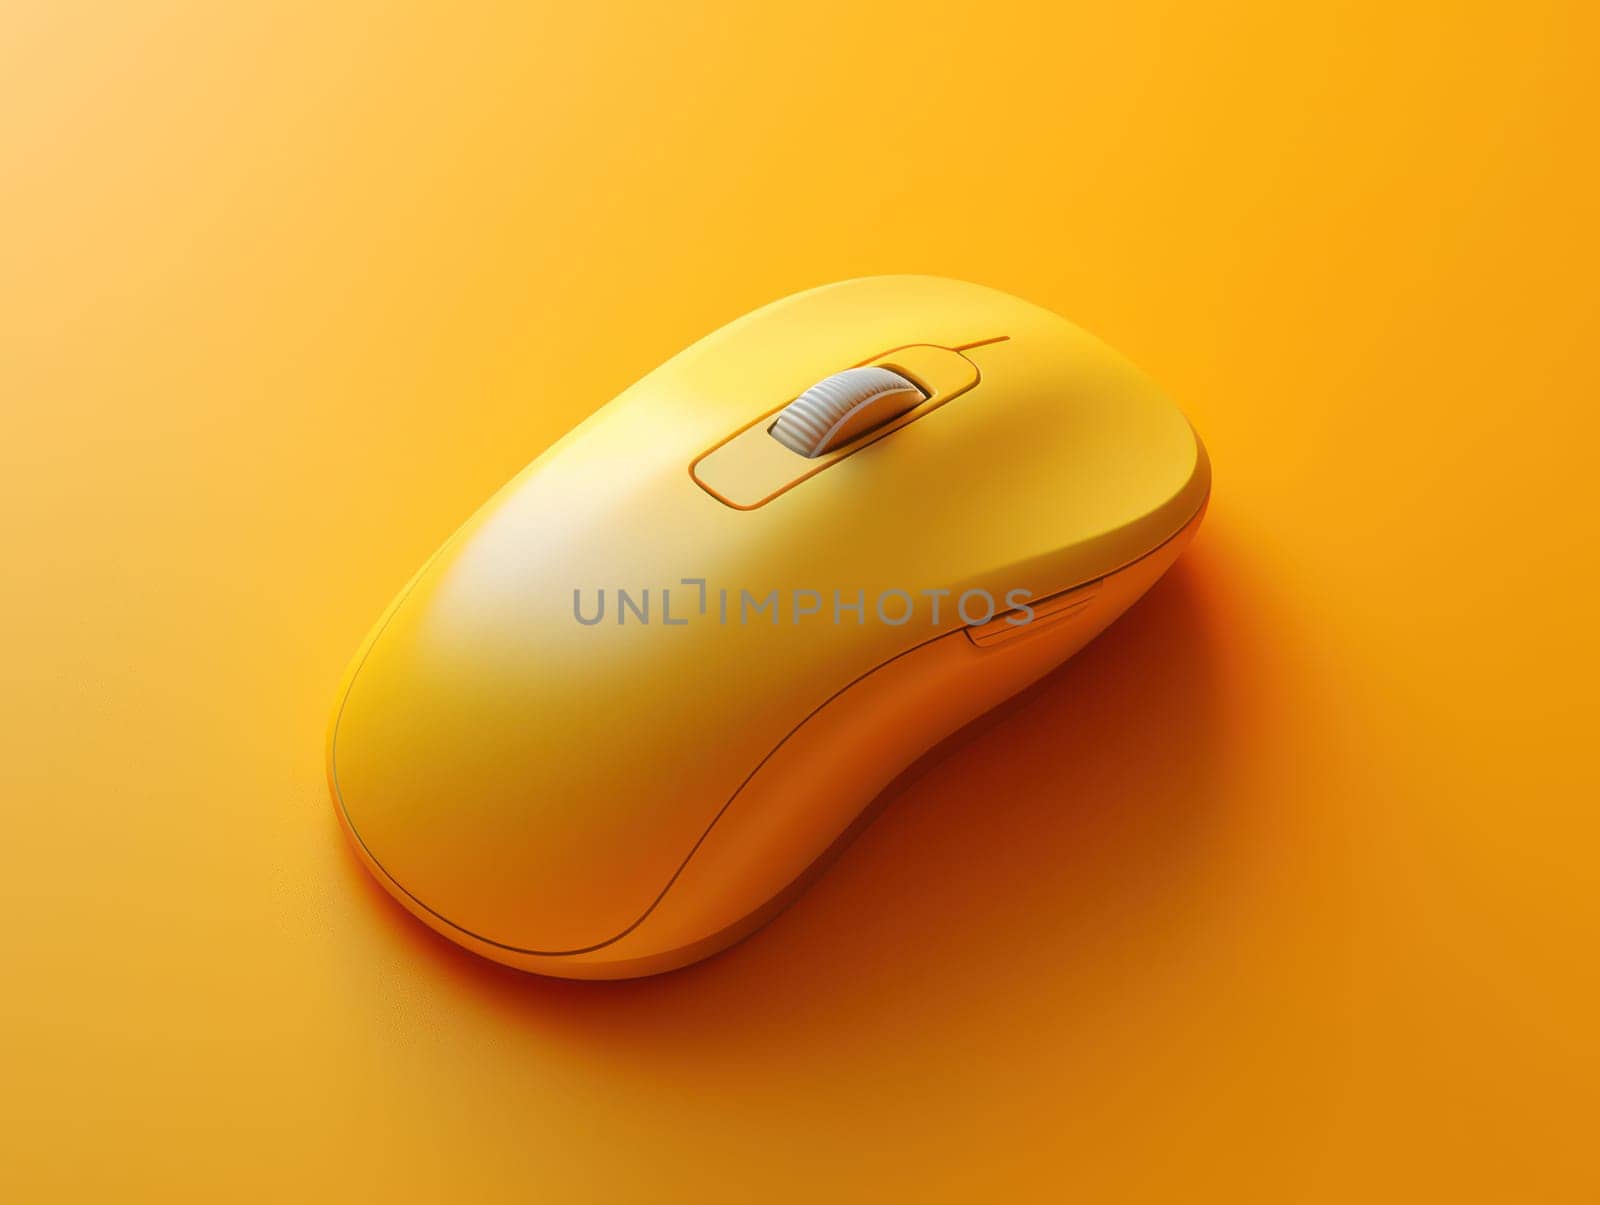 Modern White Optical Mouse with Wireless Connectivity on Black Background by Vichizh